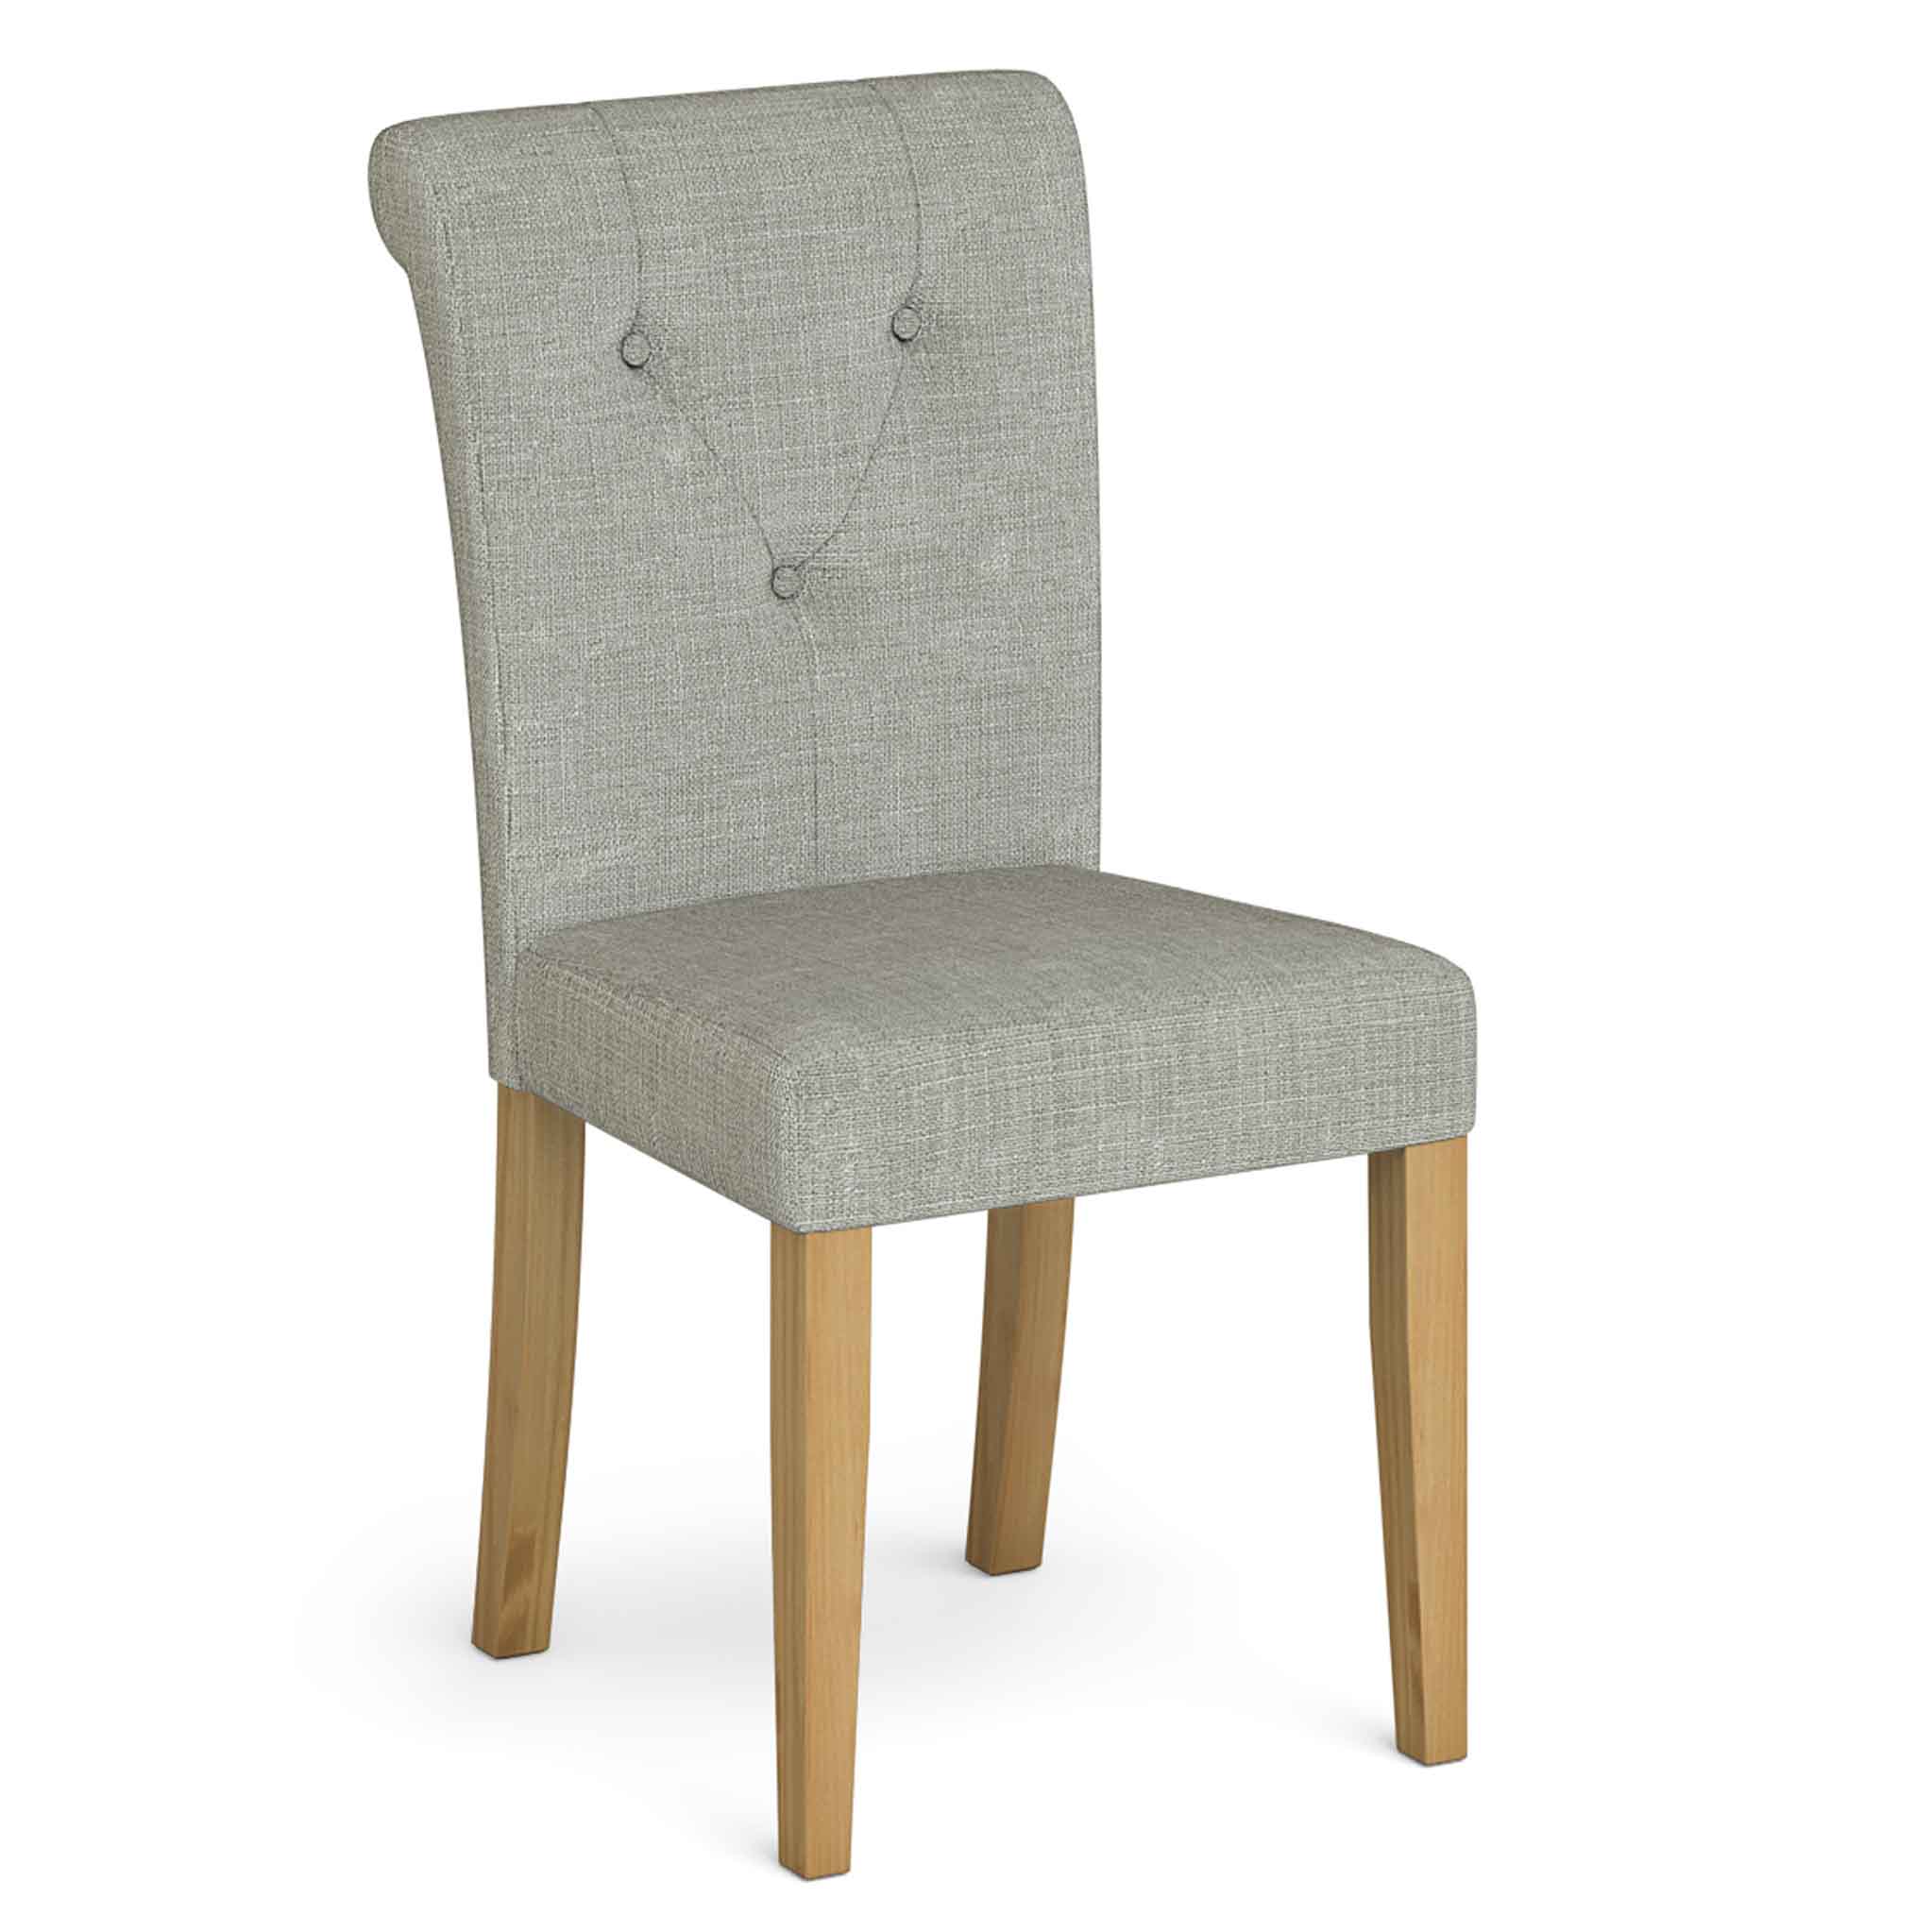 Grey Lundy Dining Chair With Real Oak Legs